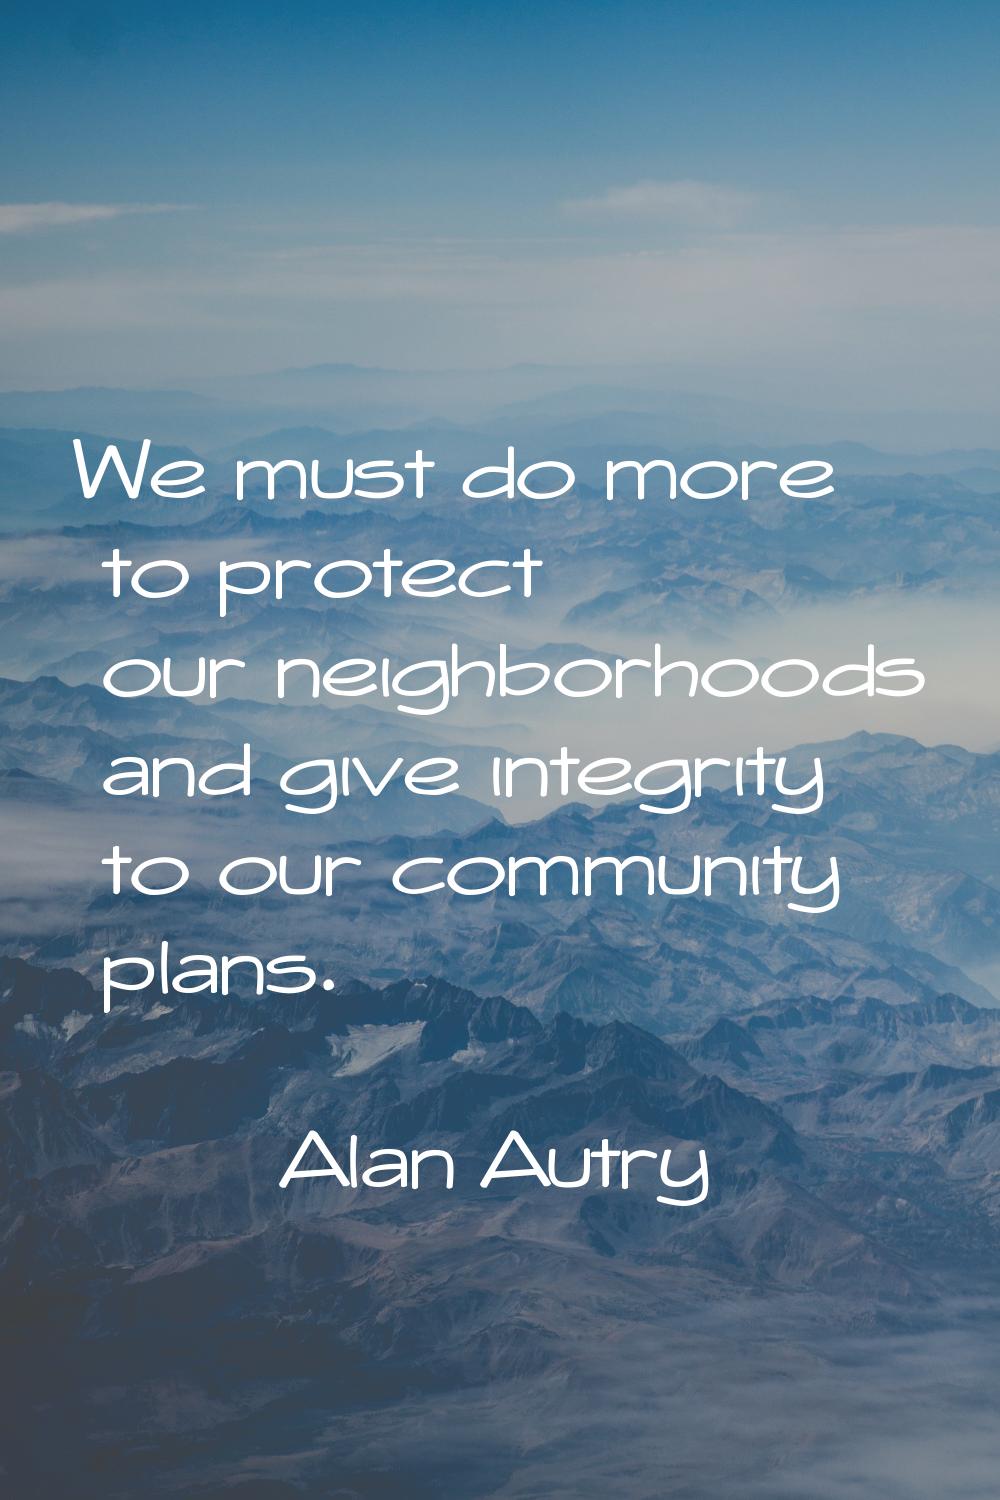 We must do more to protect our neighborhoods and give integrity to our community plans.